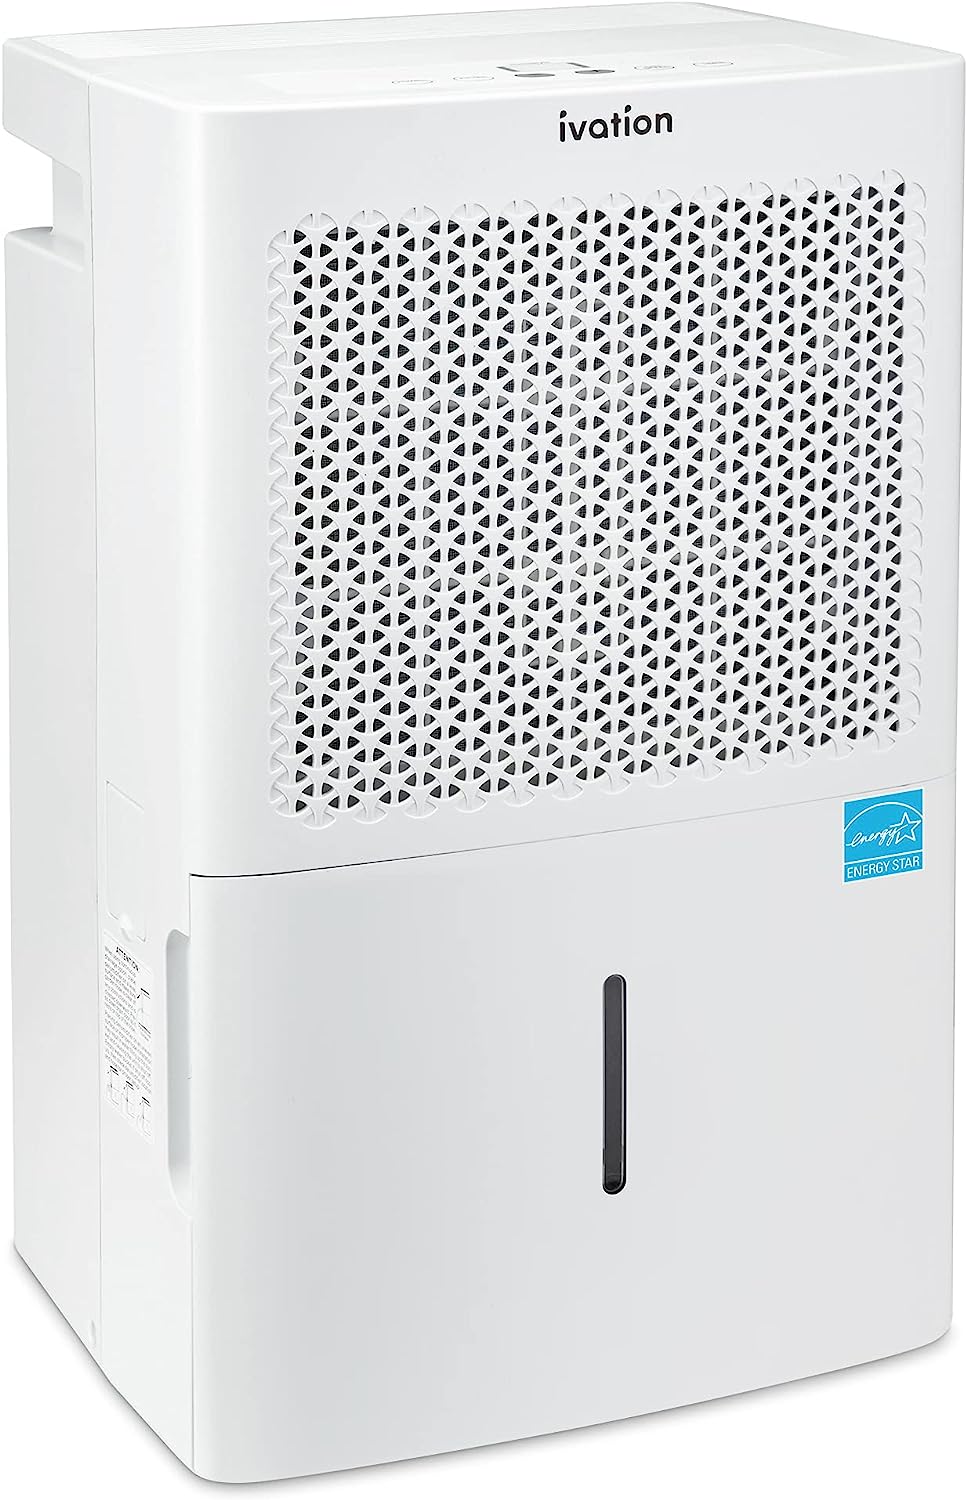 Ivation 4,500 Sq. Ft Energy Star Dehumidifier With [...]